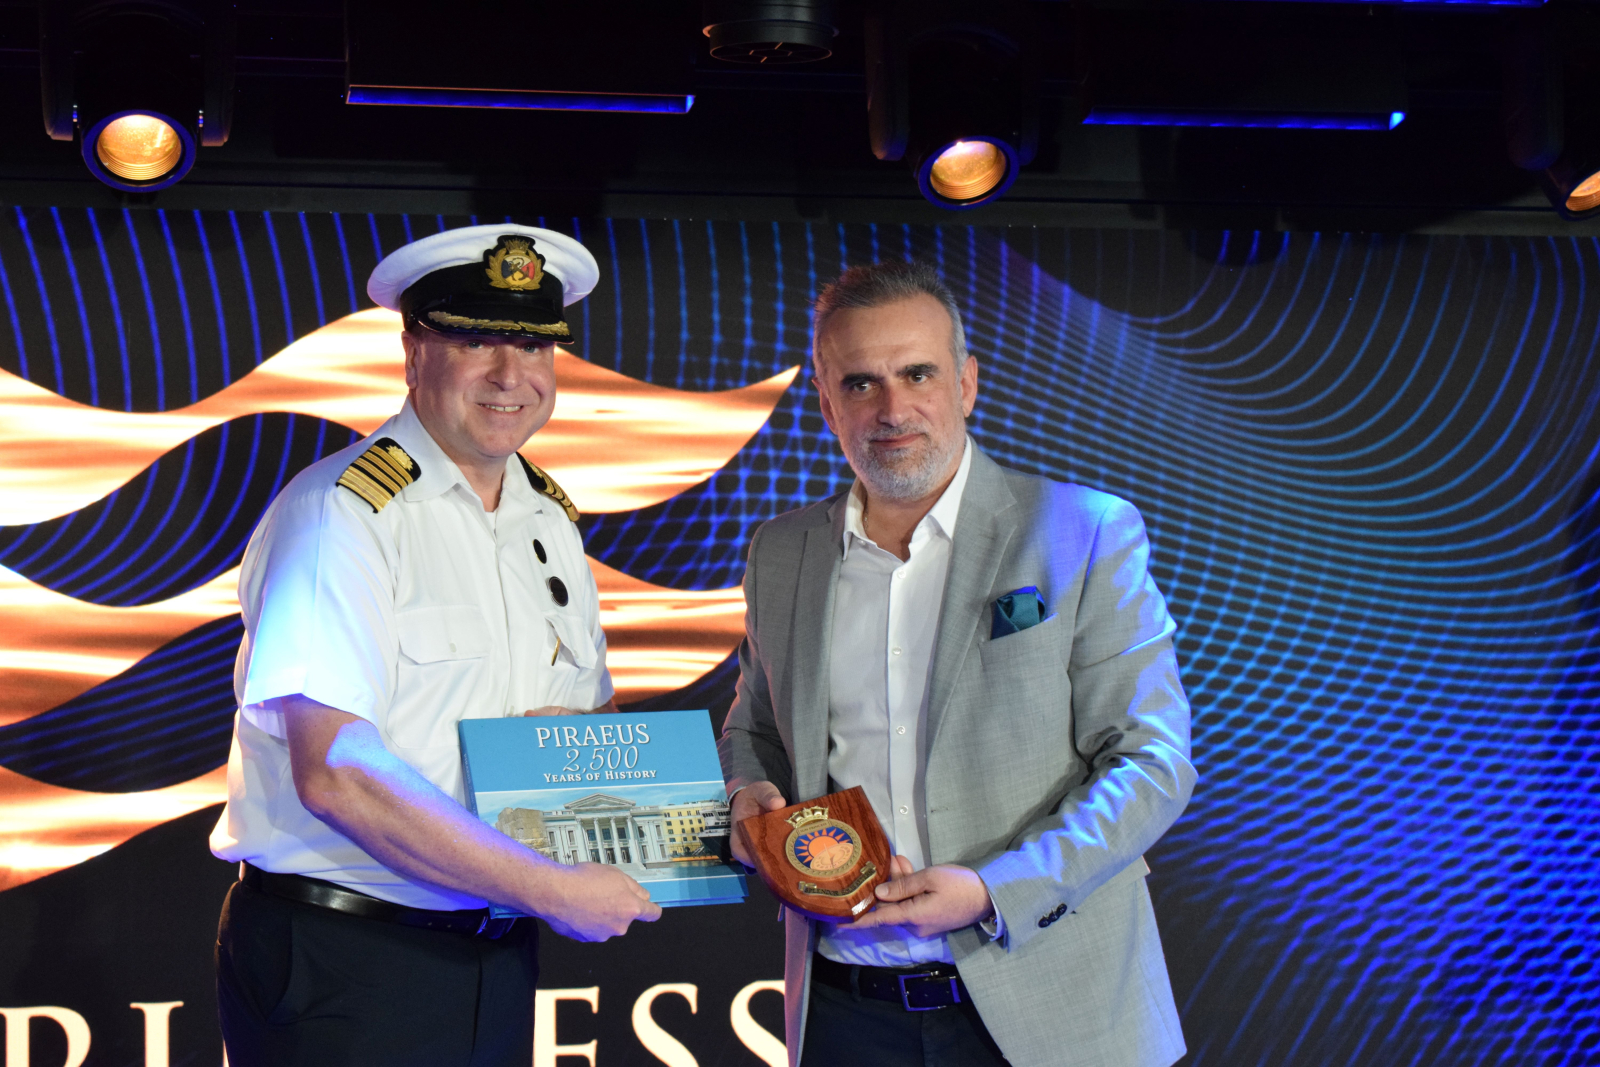 Port of Piraeus welcoming event for the new cruise ship Sun Princess